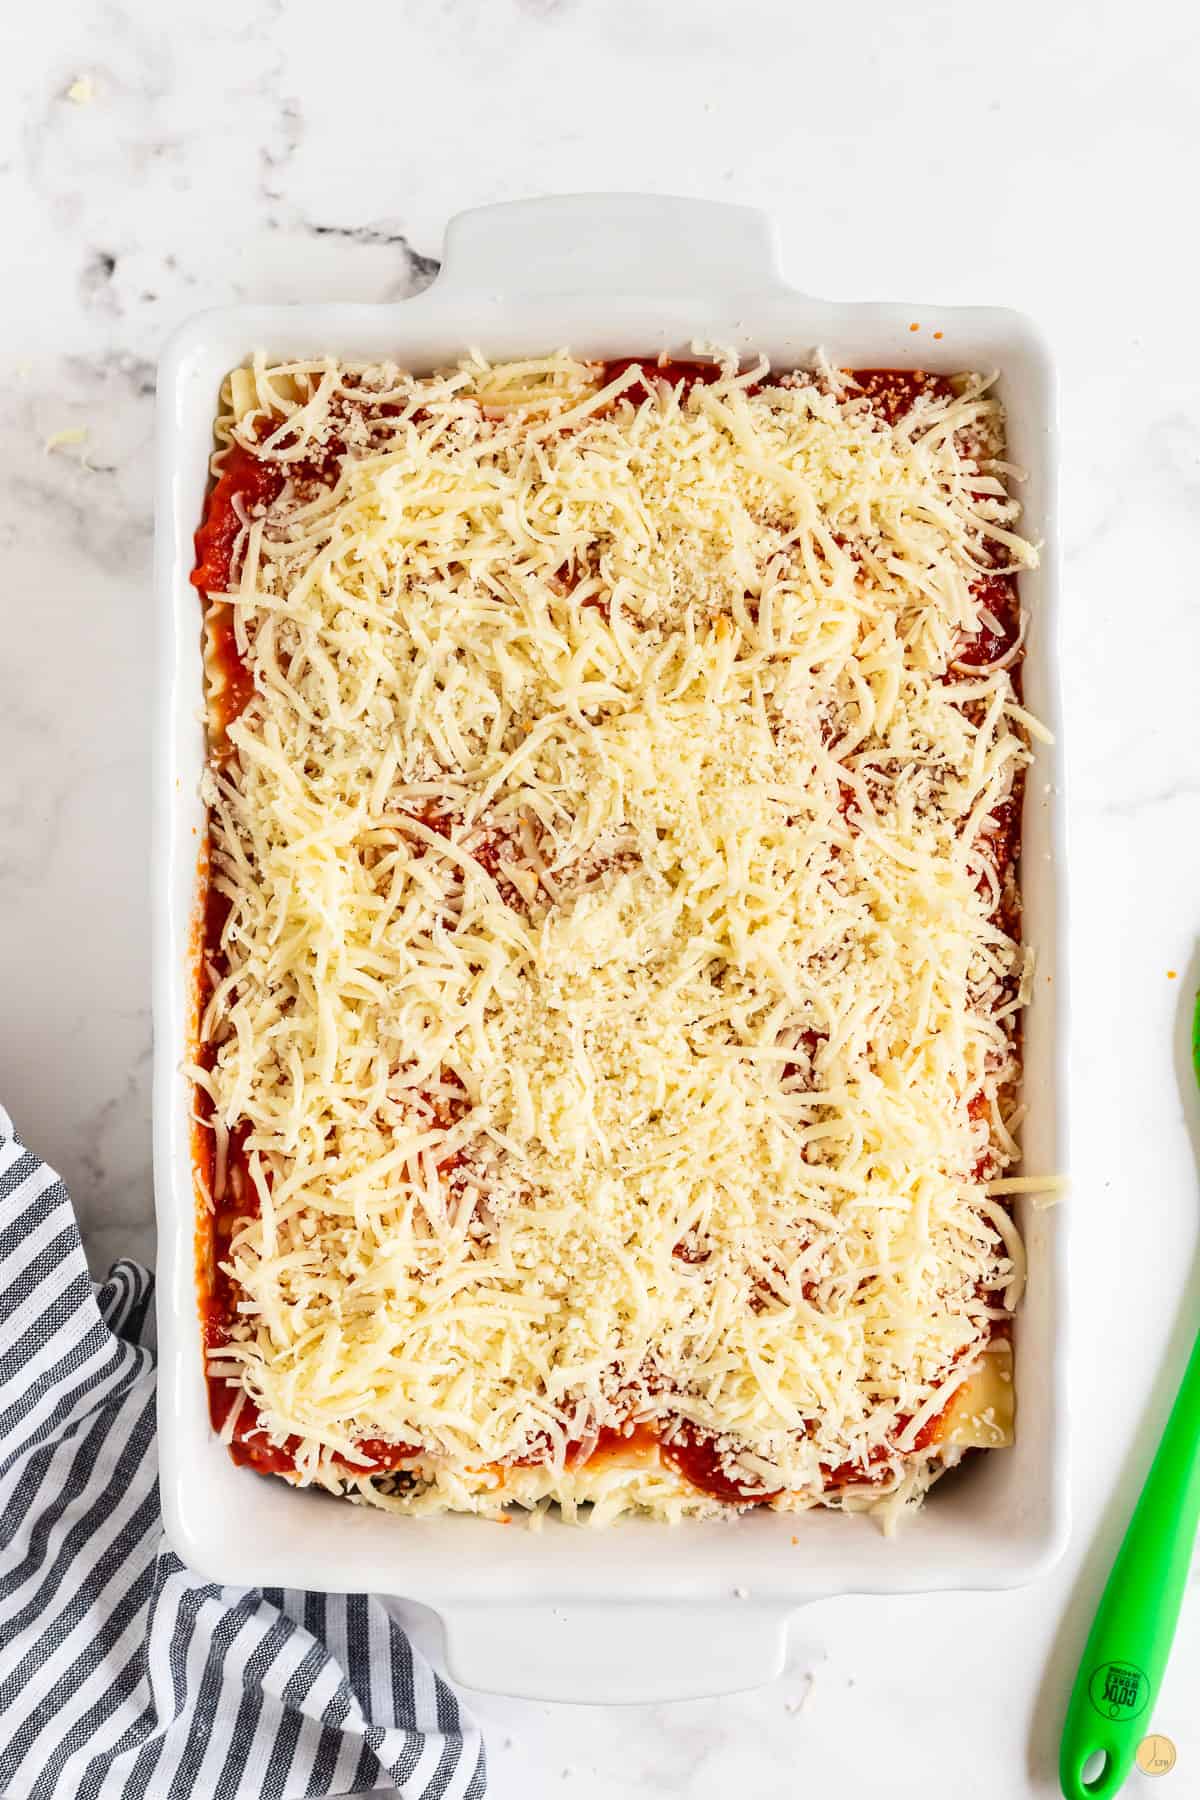 unbaked lasagna in a baking dish